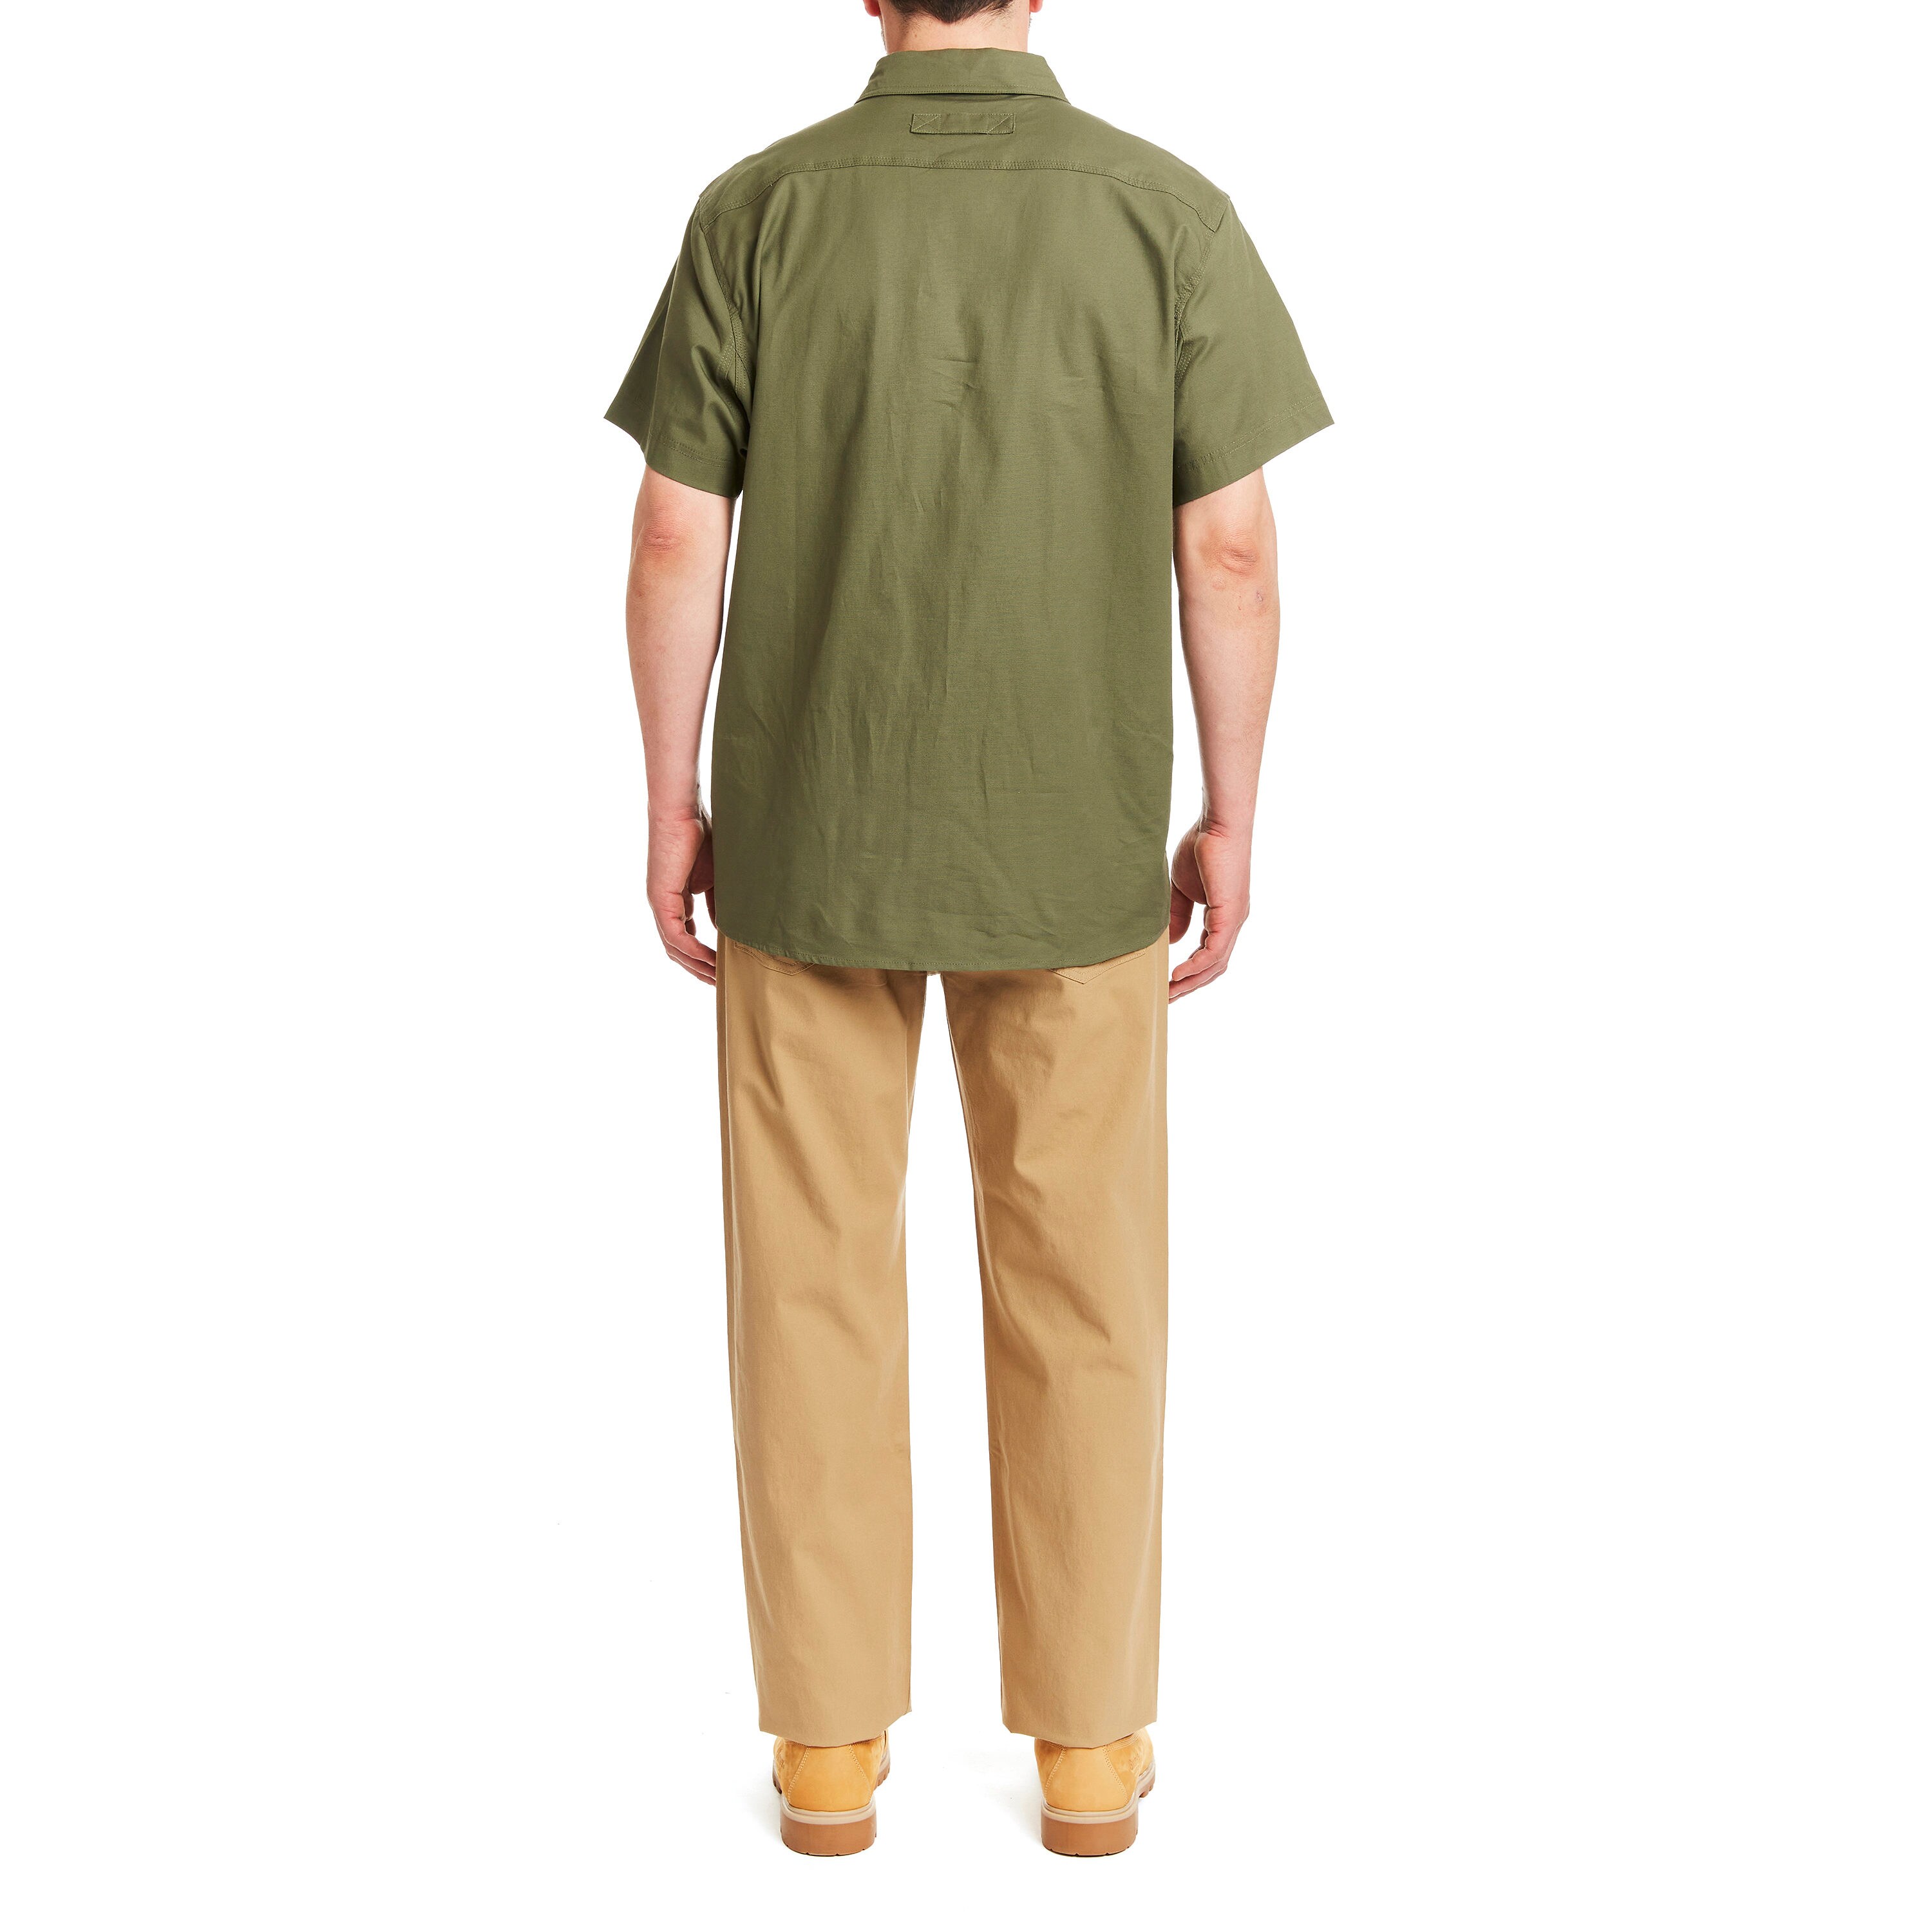 Smith's Workwear Men's Relaxed Fit Black Olive Stretch Canvas Work